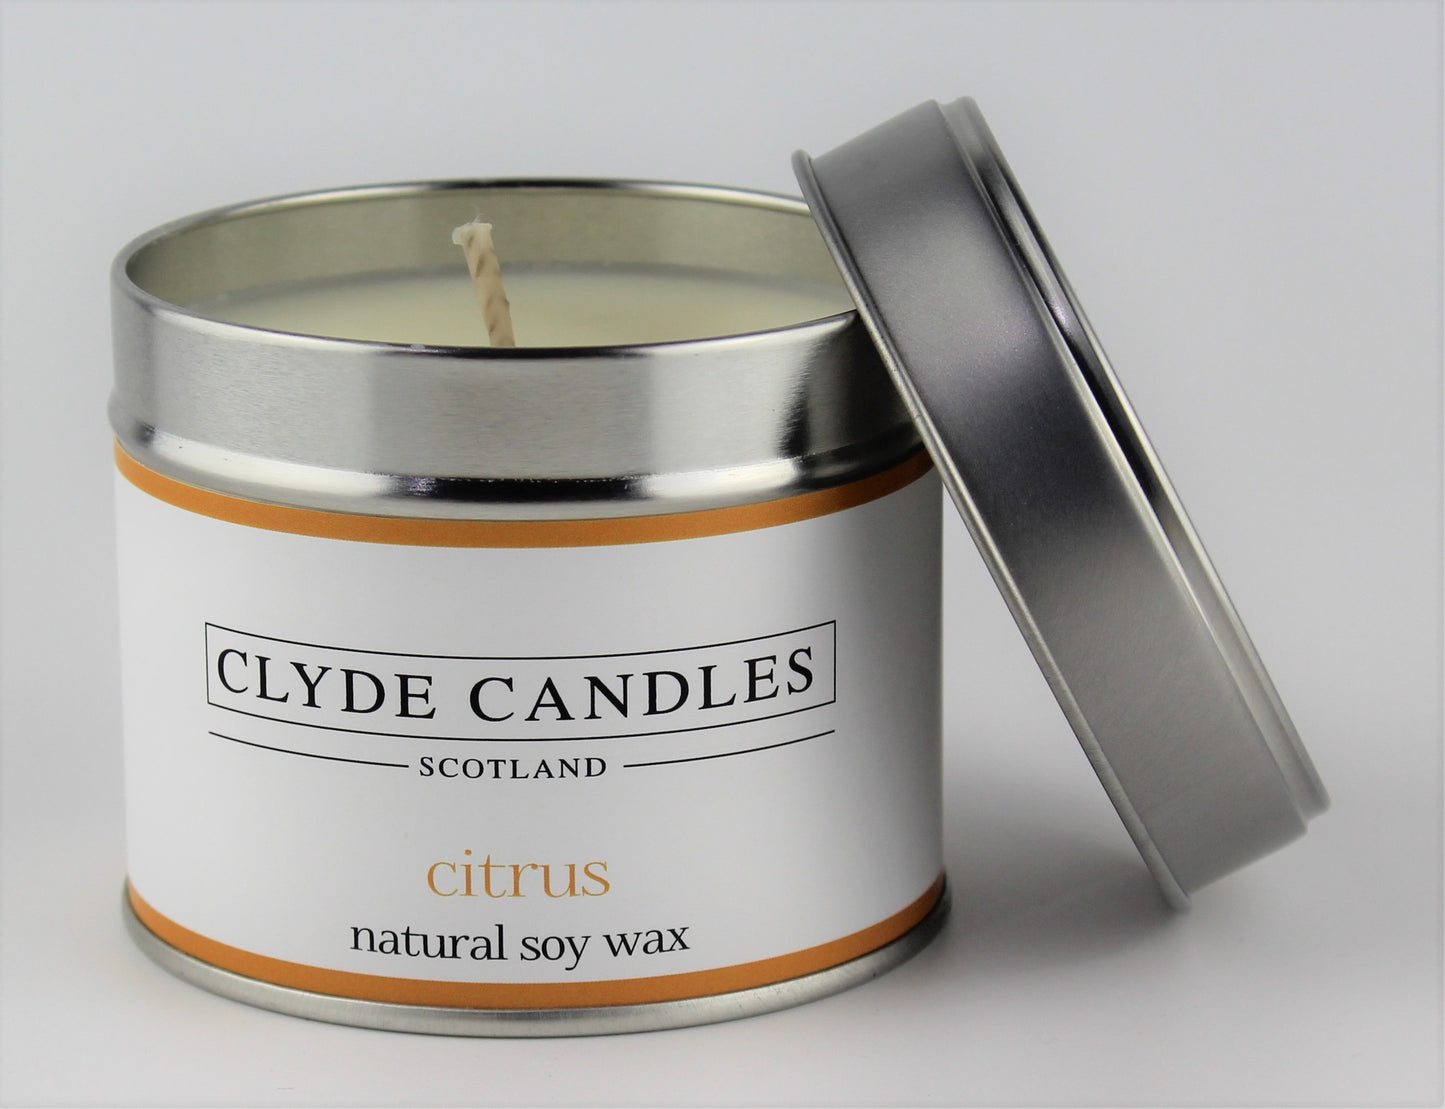 Citrus Scented Candle Tin  Natural Soy wax, Scottish Candles, Clyde Candles